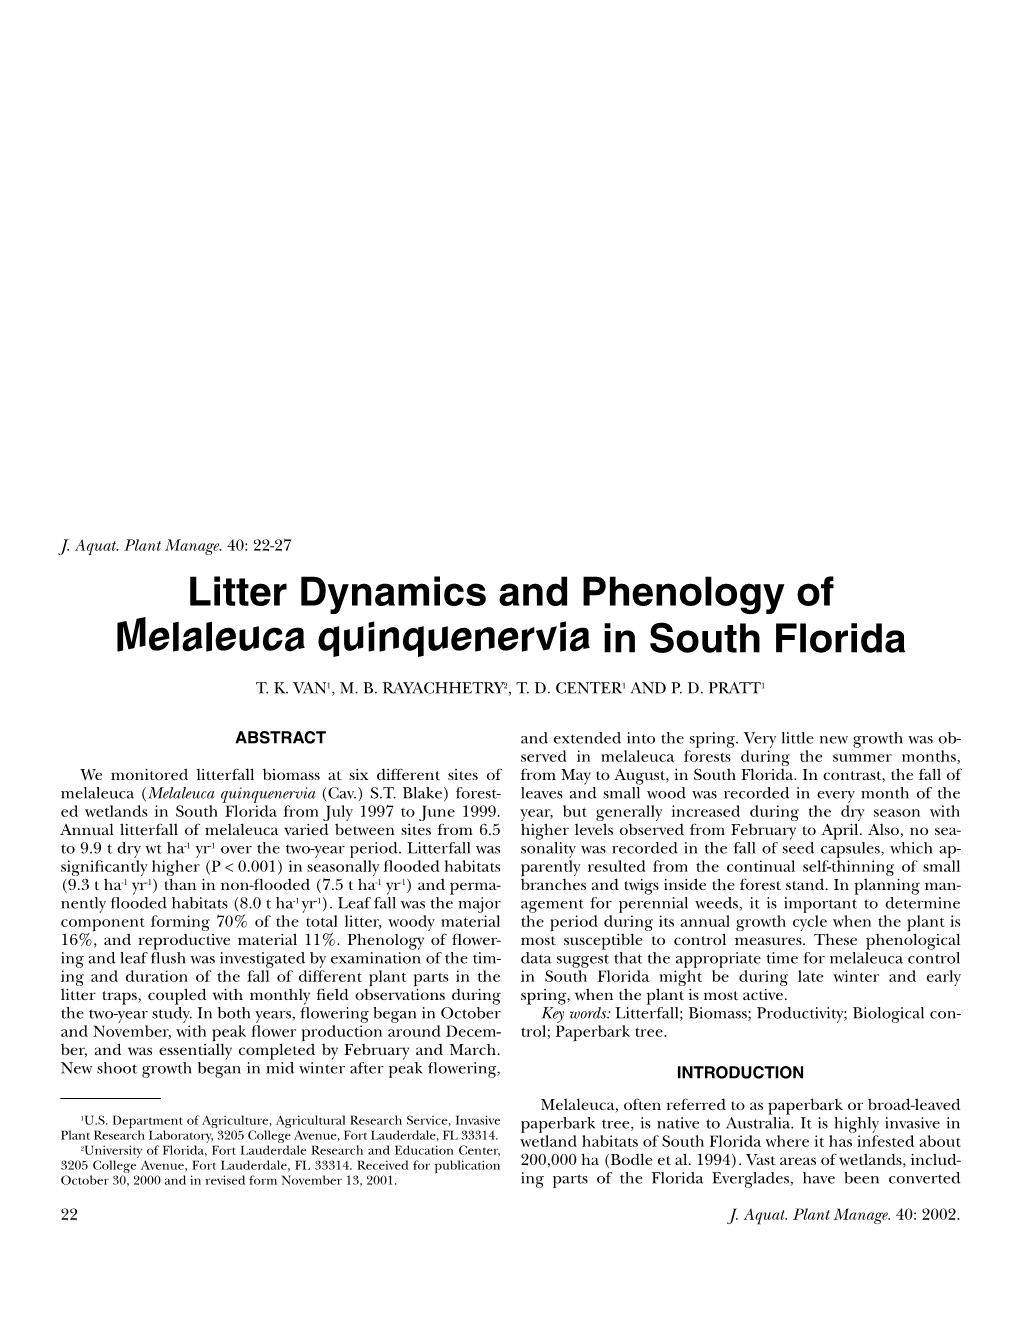 Litter Dynamics and Phenology of Melaleuca Quinquenervia in South Florida